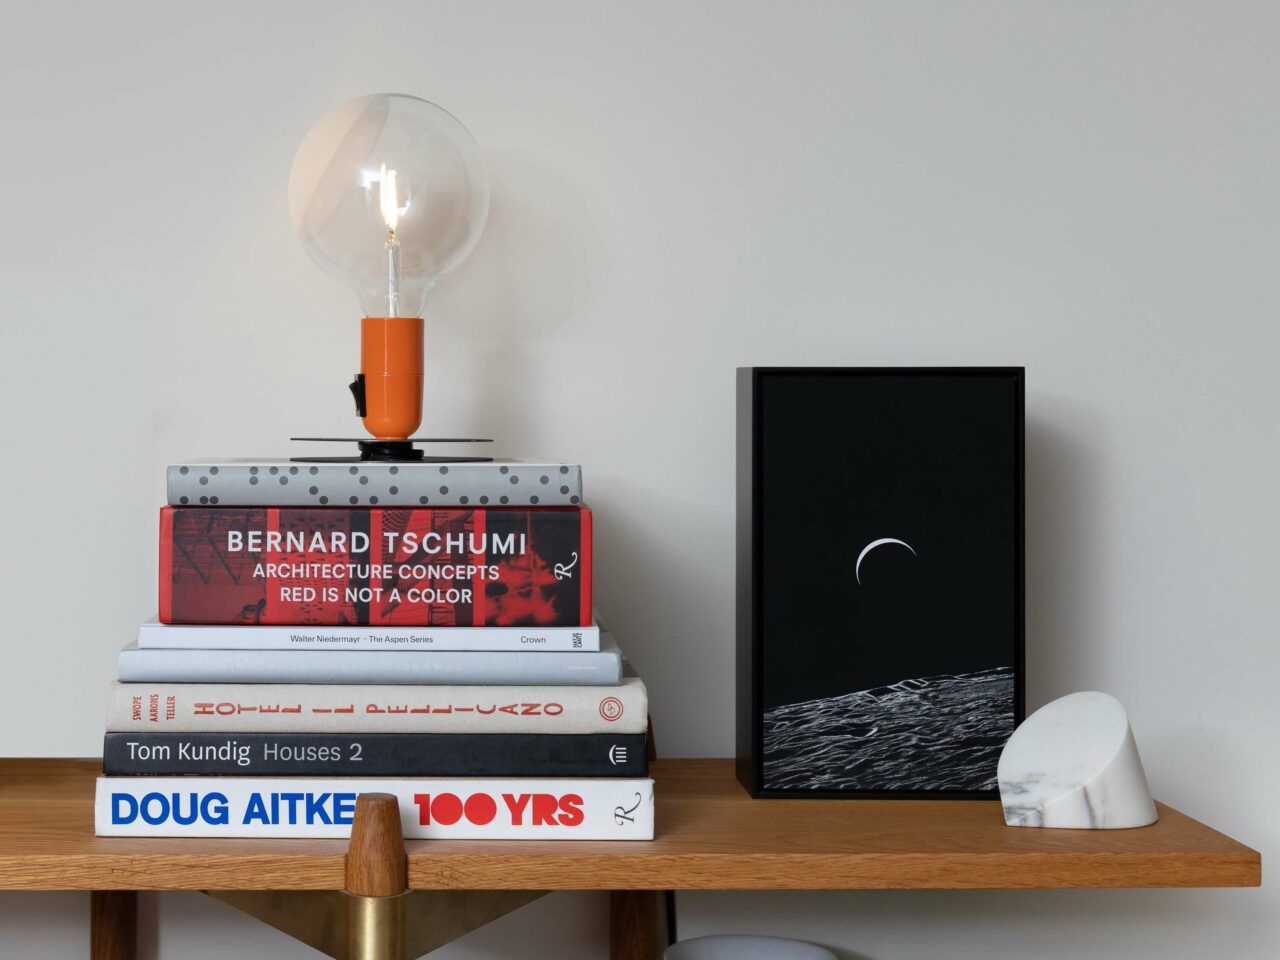 Lampadina is a designer table lamp produced by Flos, designed by Achille Castiglioni and proposed by Peverelli